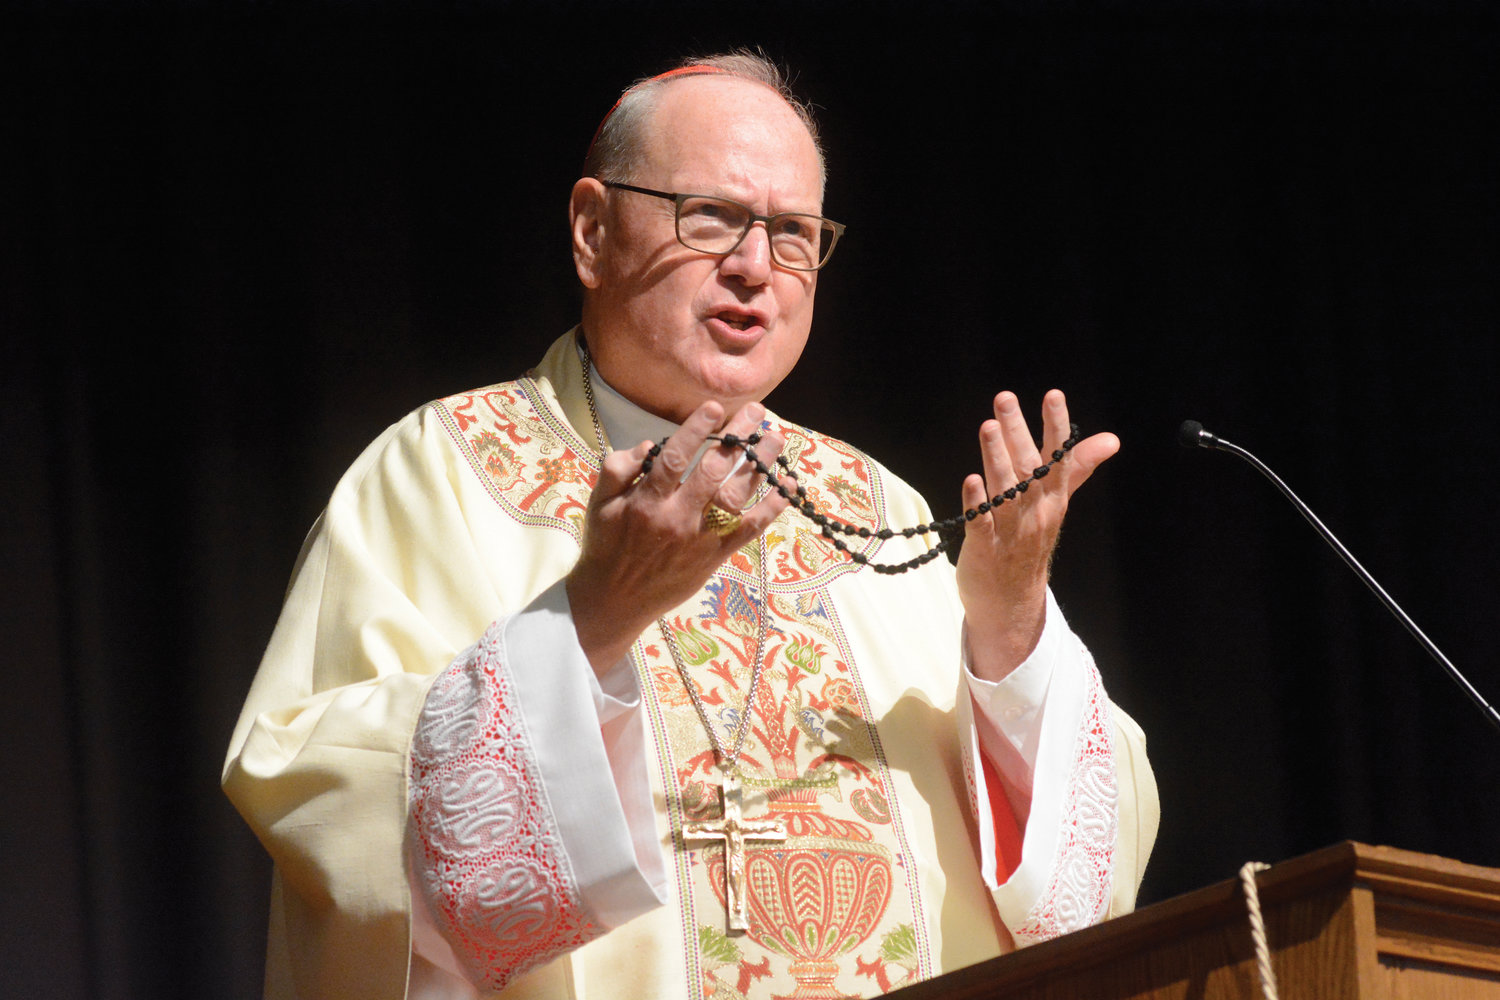 Cardinal Dolan, speaking at the Mass he offered Oct. 15 at the annual forum for catechesis and youth ministry, said the mysteries of the Rosary could be one practical measure for catechists to use with their students to transmit the essentials of the Catholic faith.